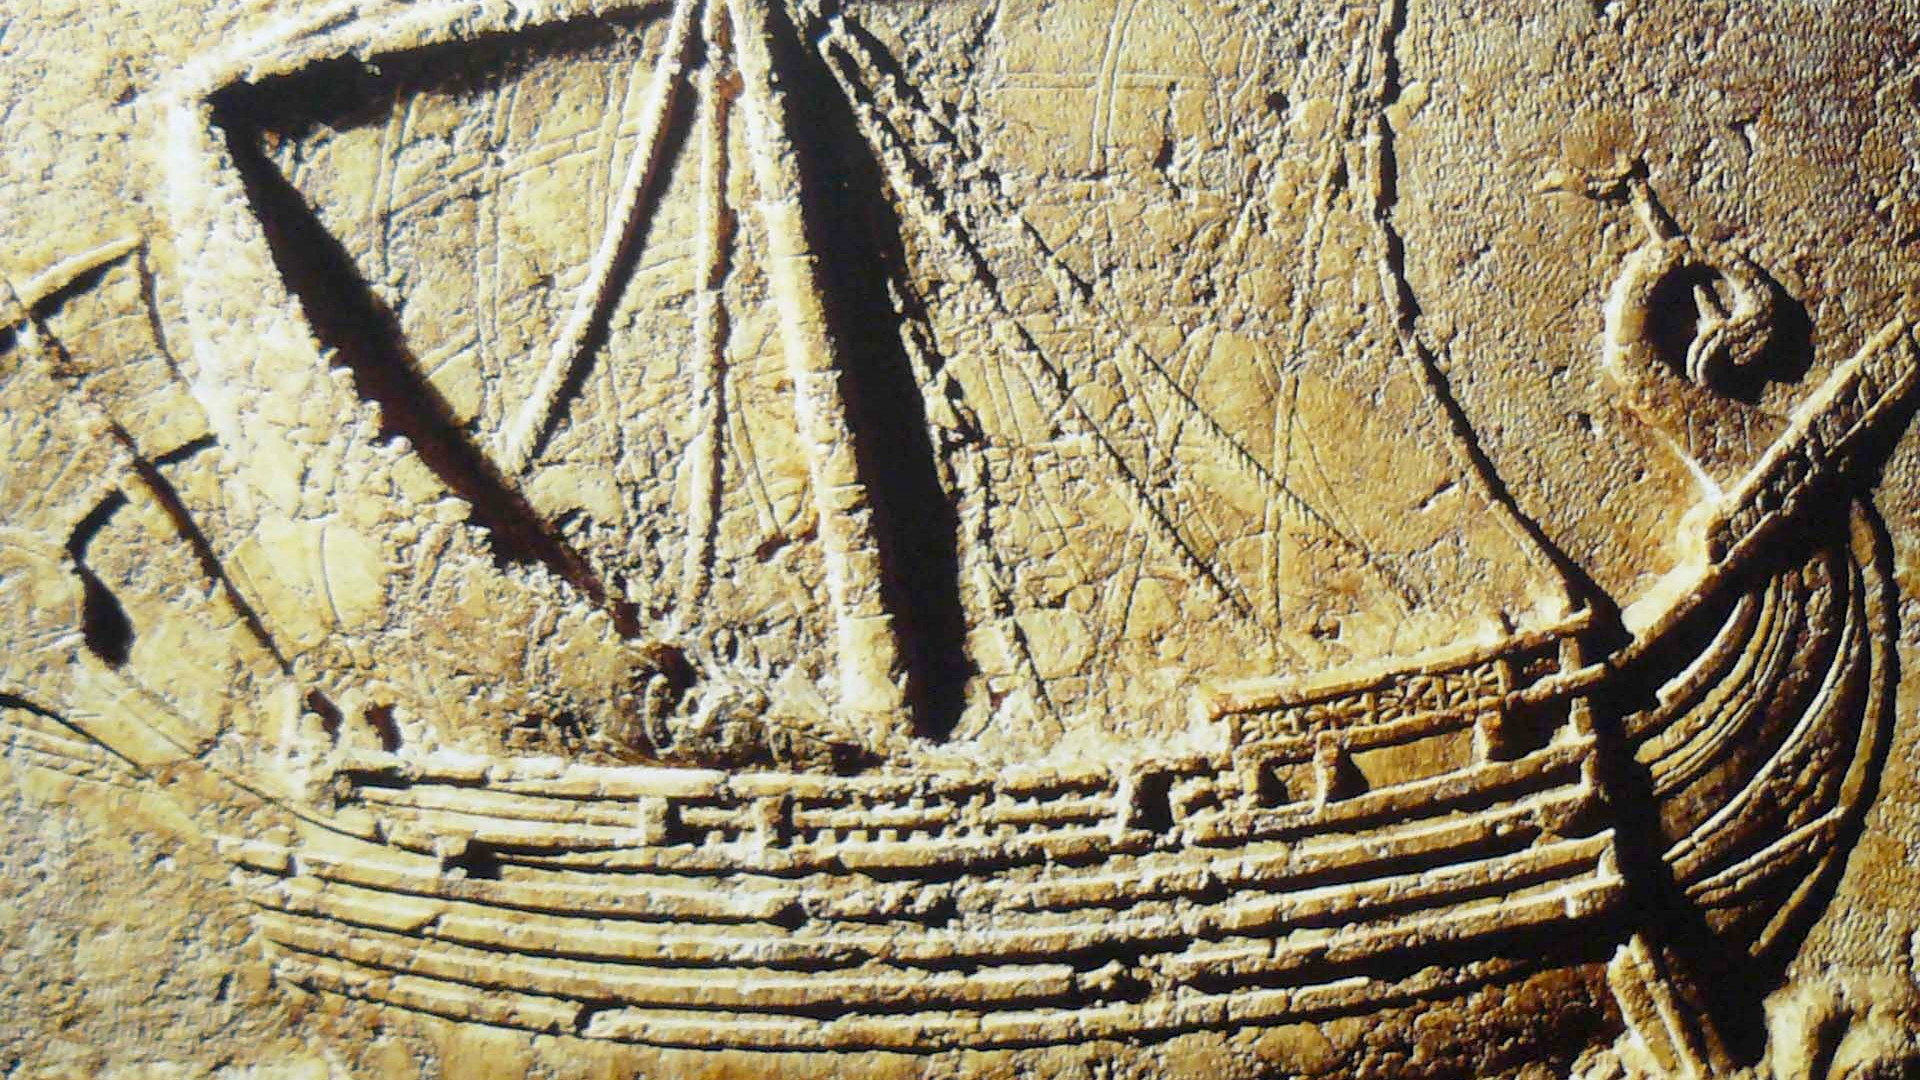 Phoenician ship Carved on the face of a sarcophagus. 2nd century AD. Original image by Elias Ziade. CC BY-SA 3.0.